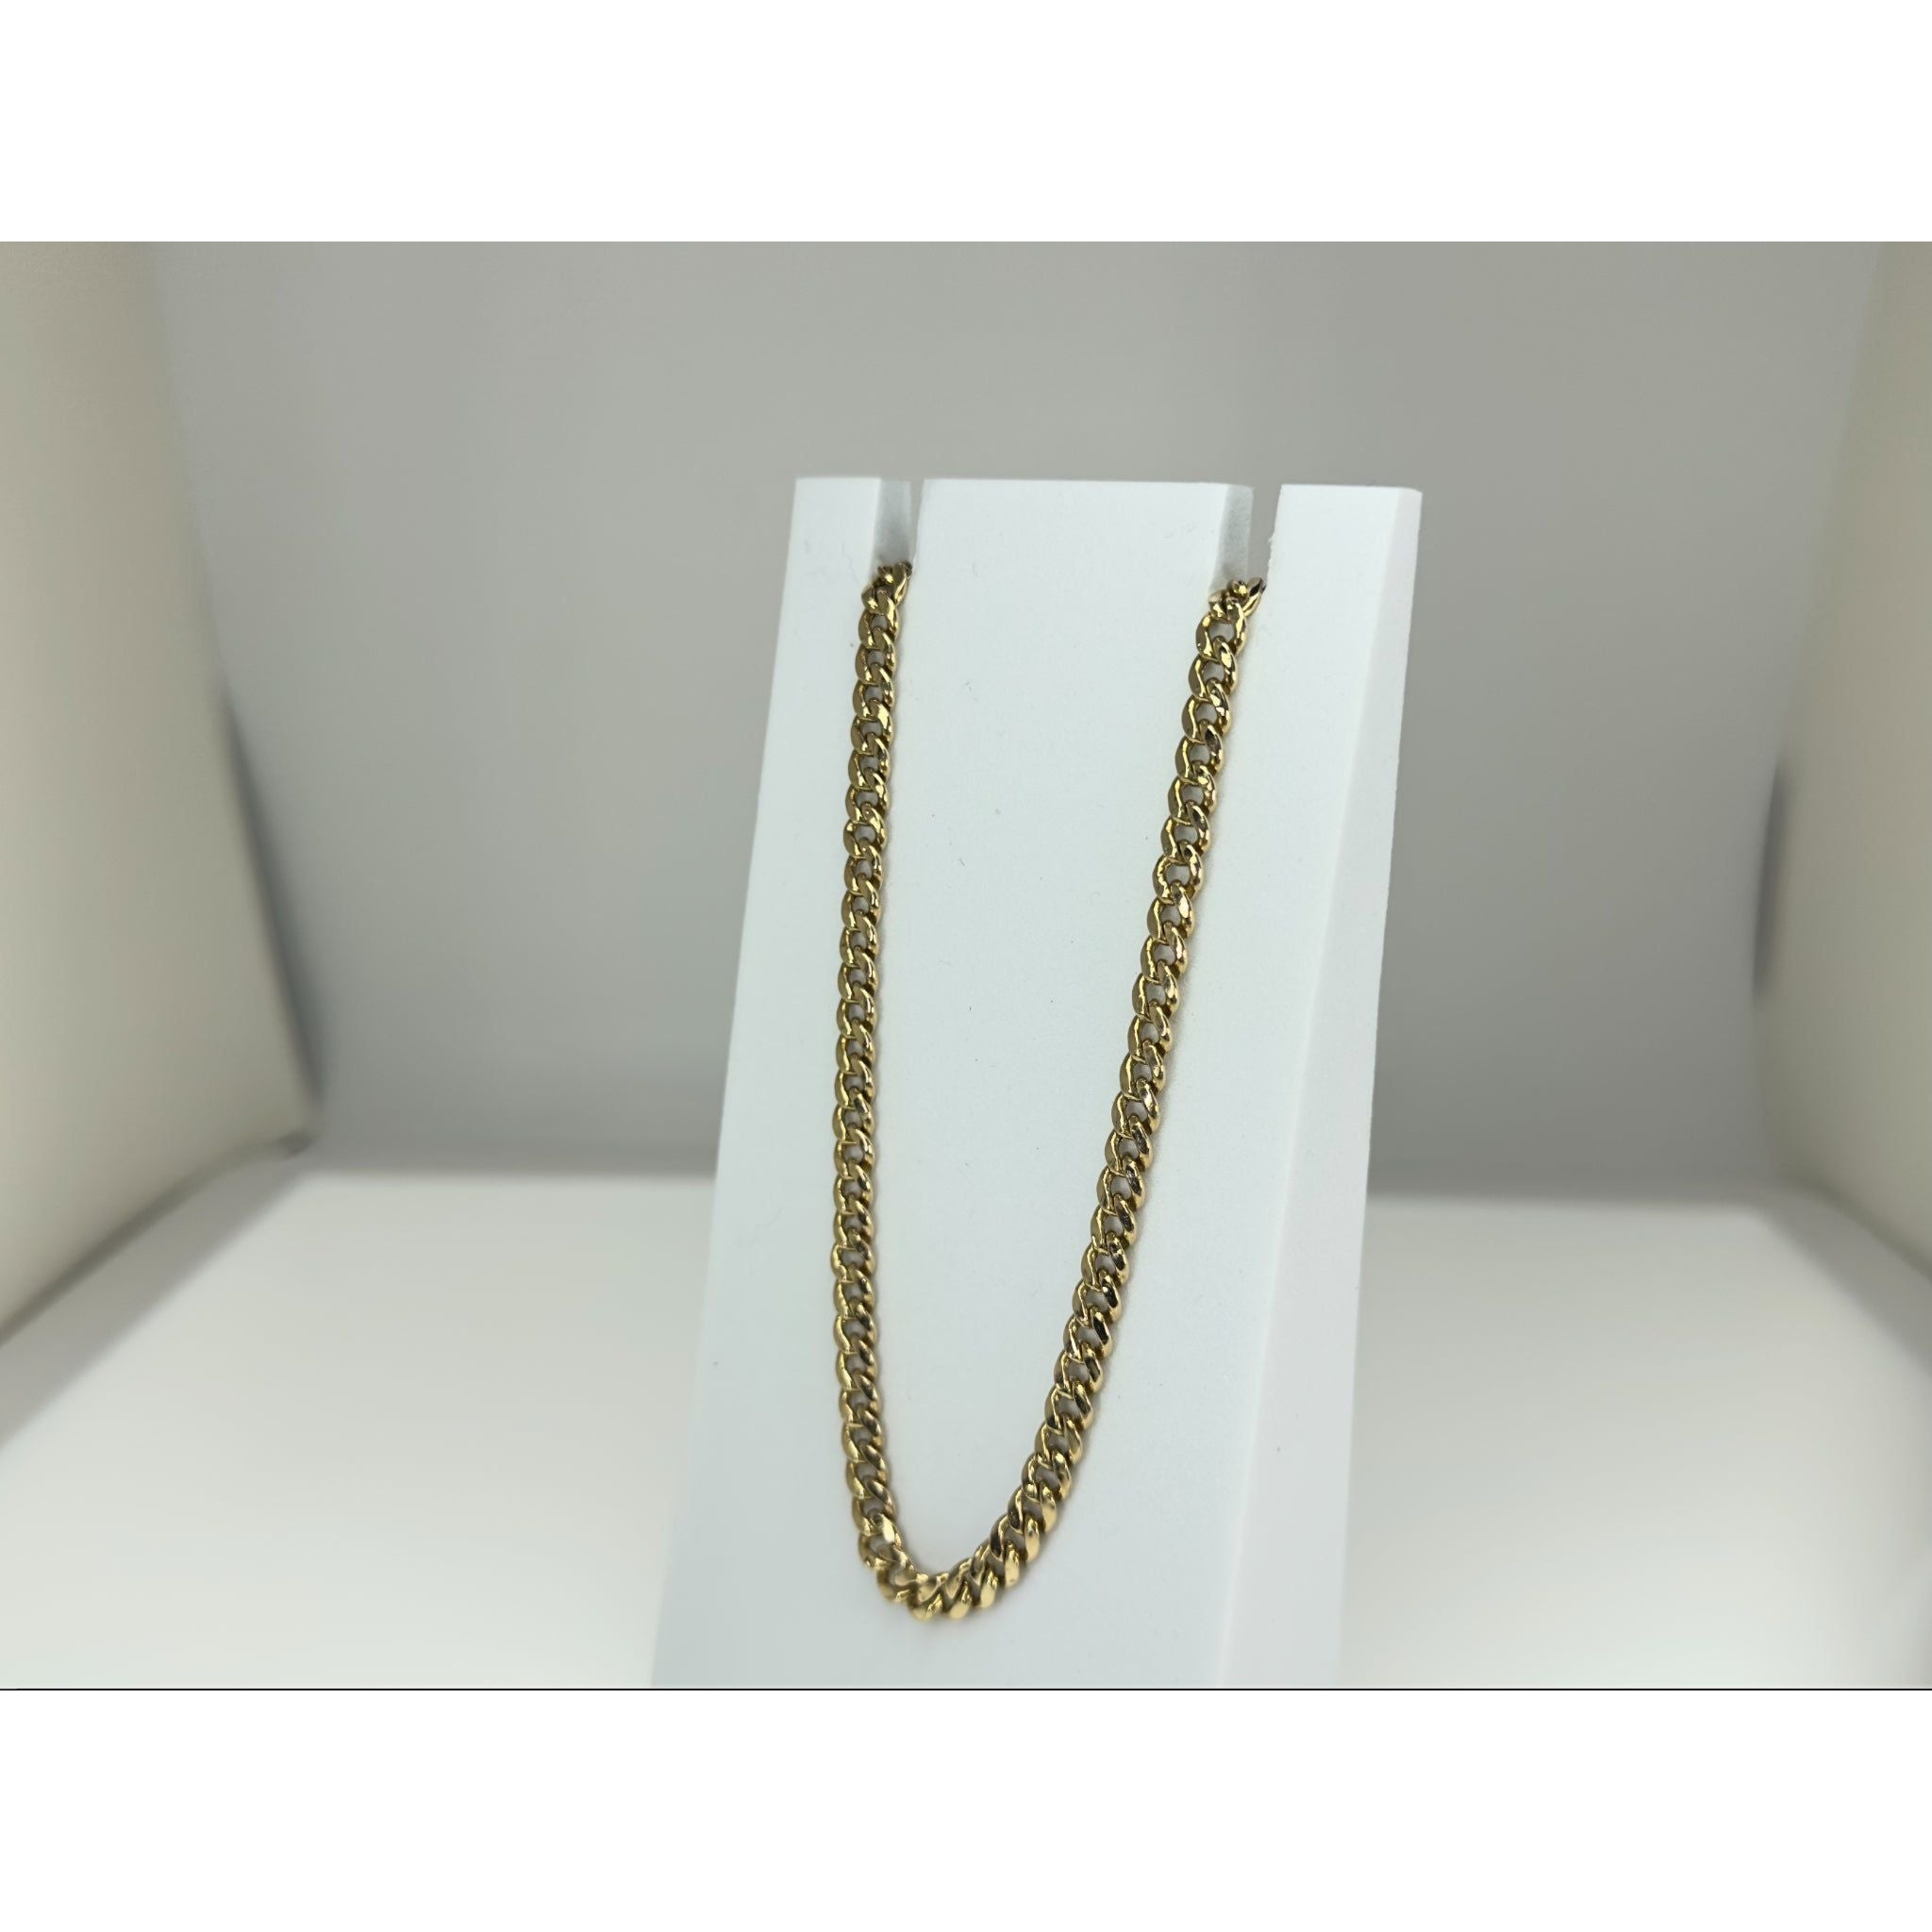 DR1725 - 14K Yellow Gold - Men's Gold Chains